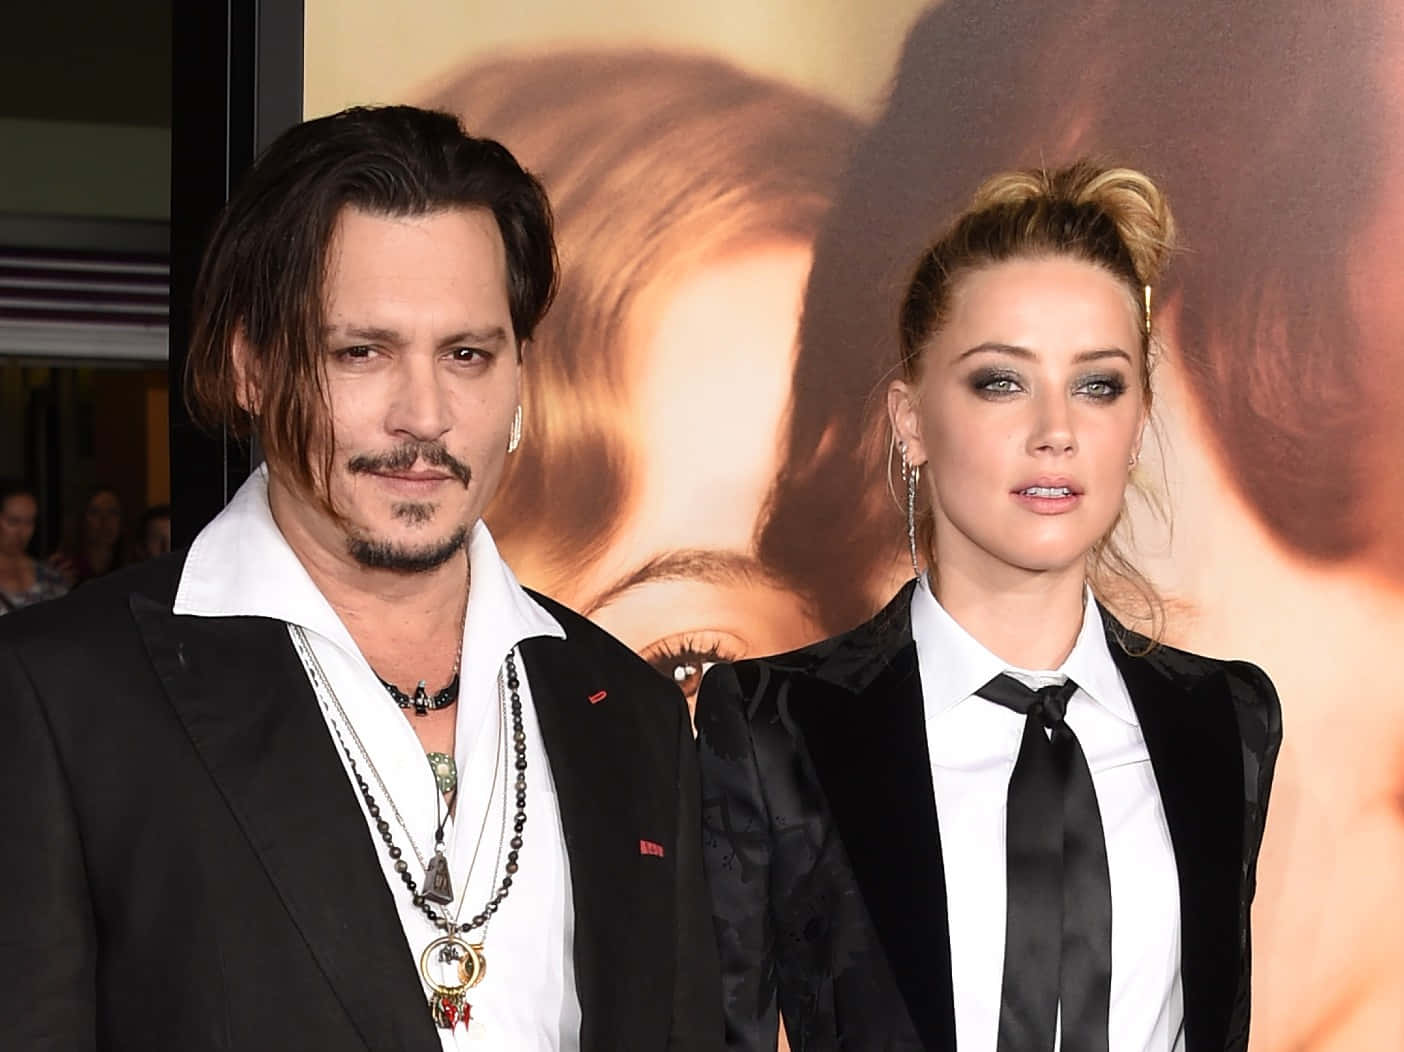 Johnny Depp and Amber Heard in an Off-Screen Moment